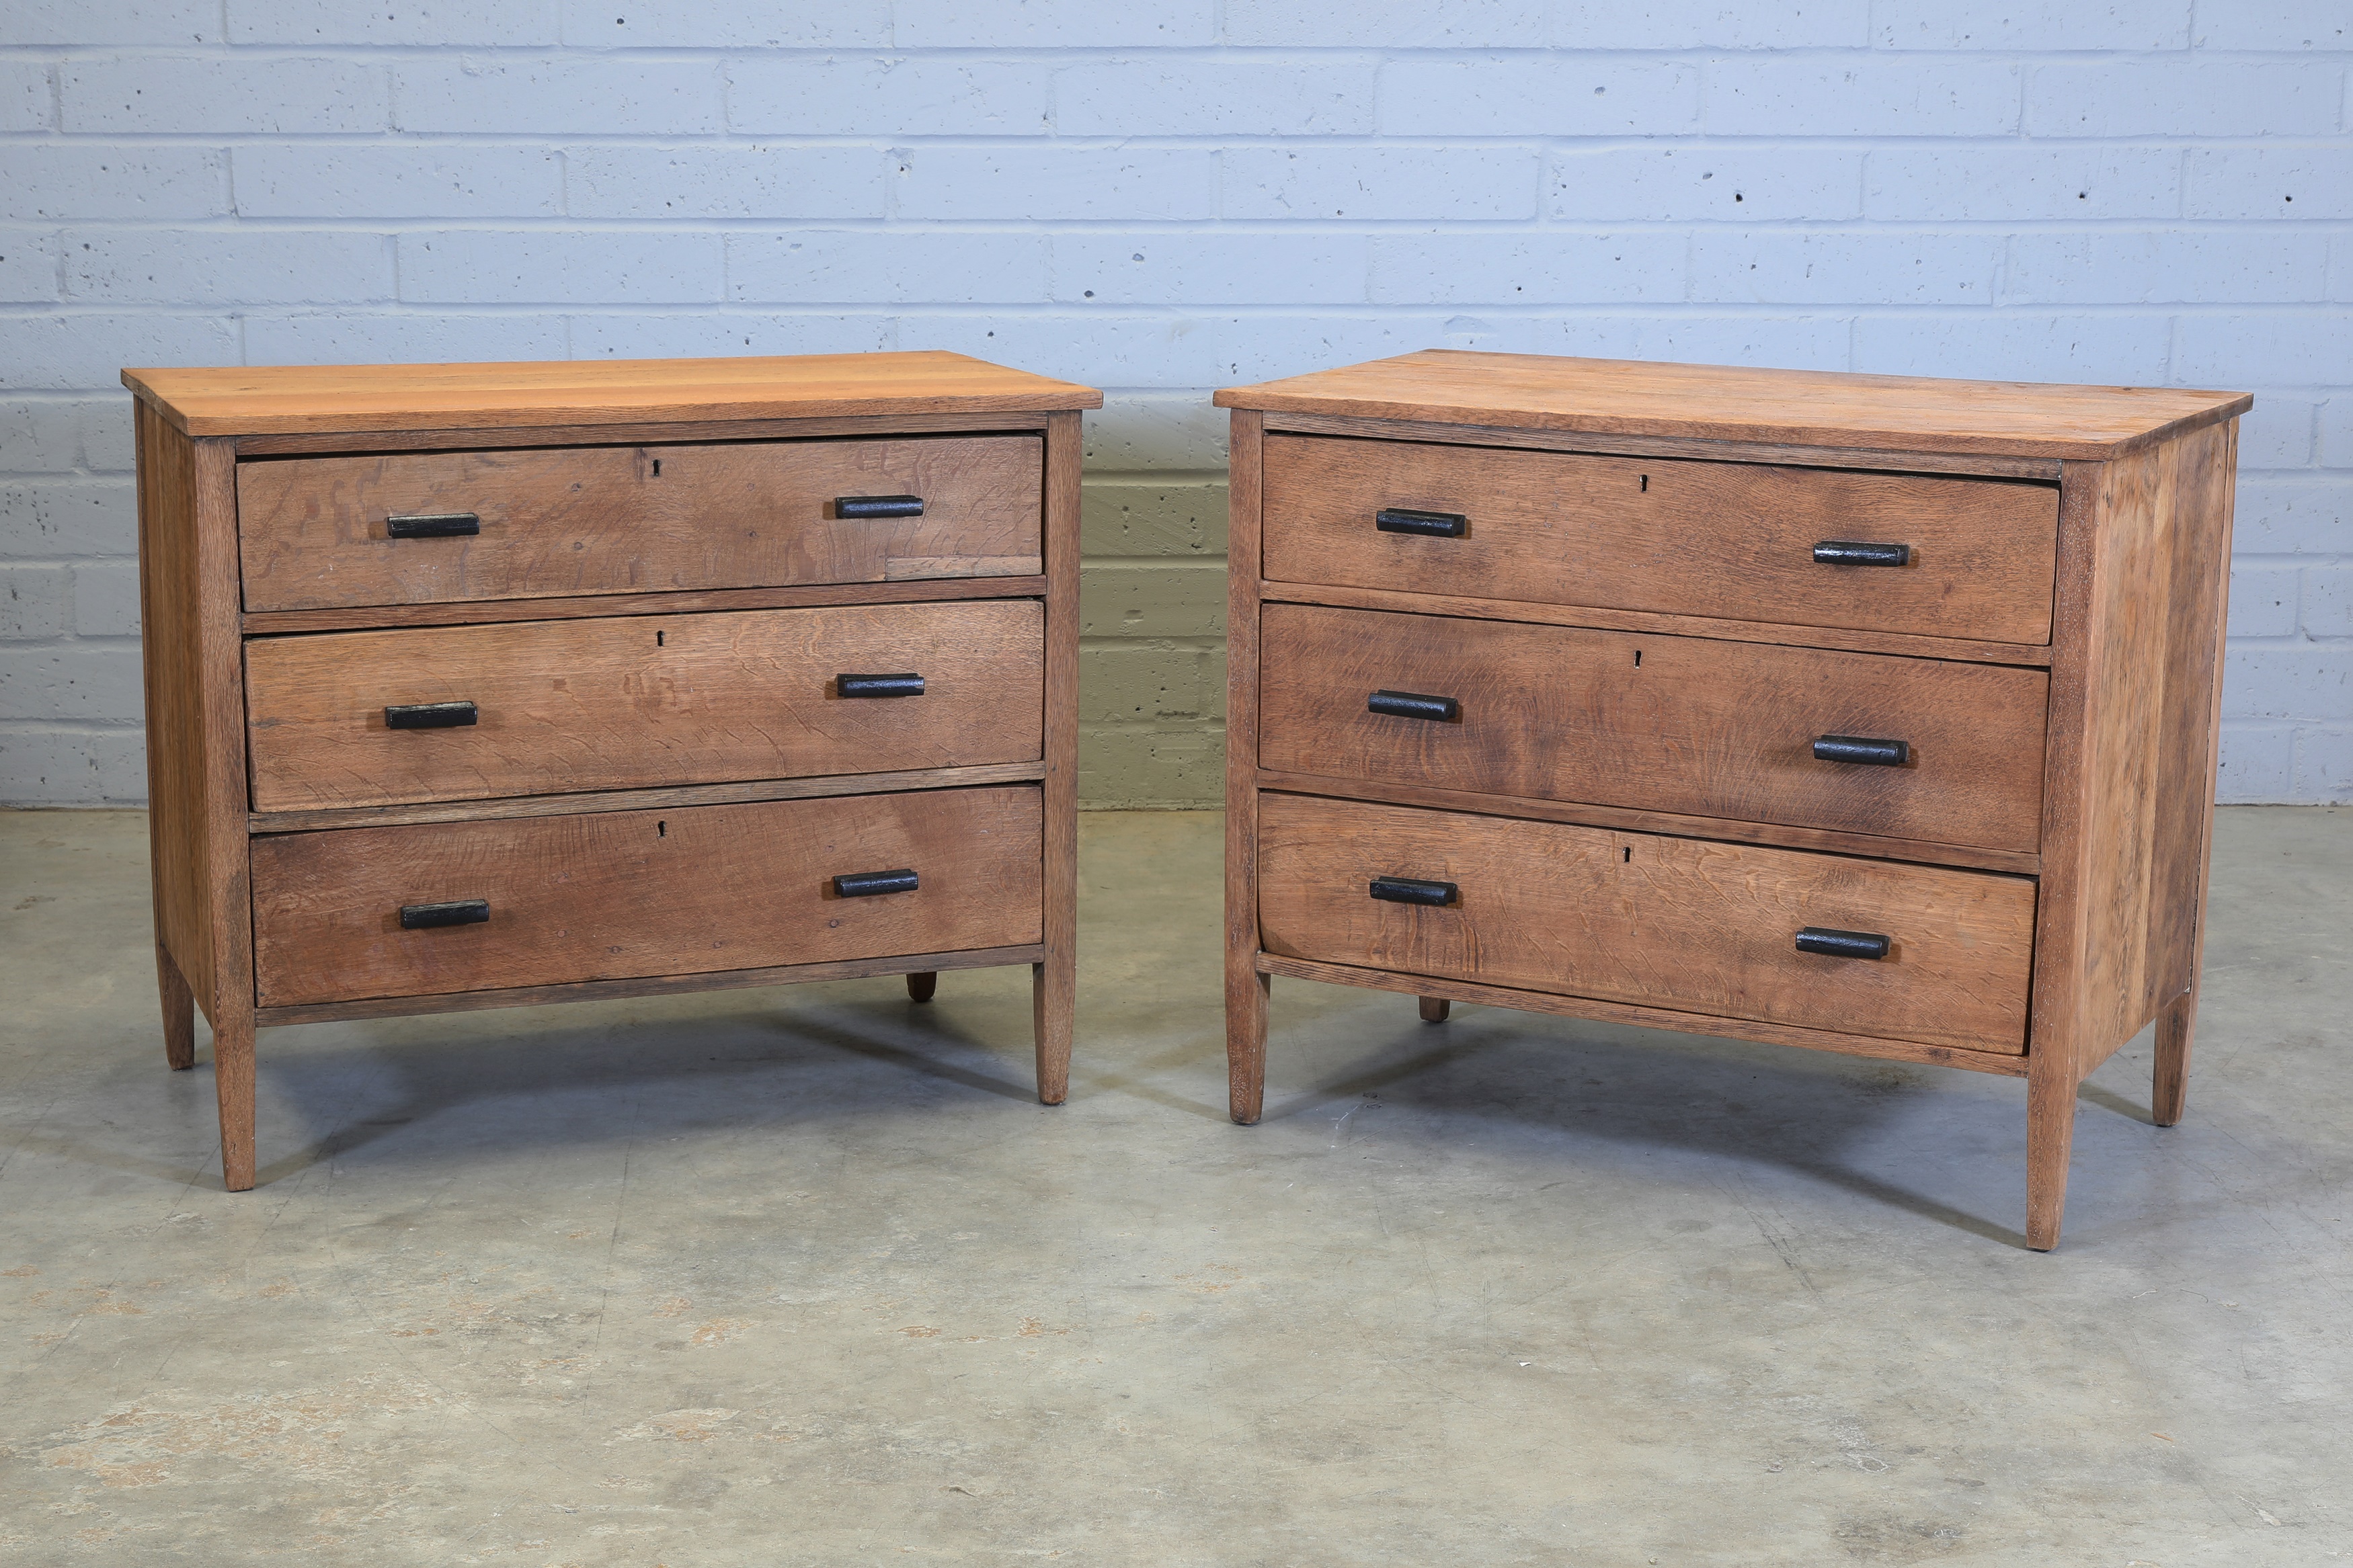 A pair of oak chest of drawers (sold for £365)